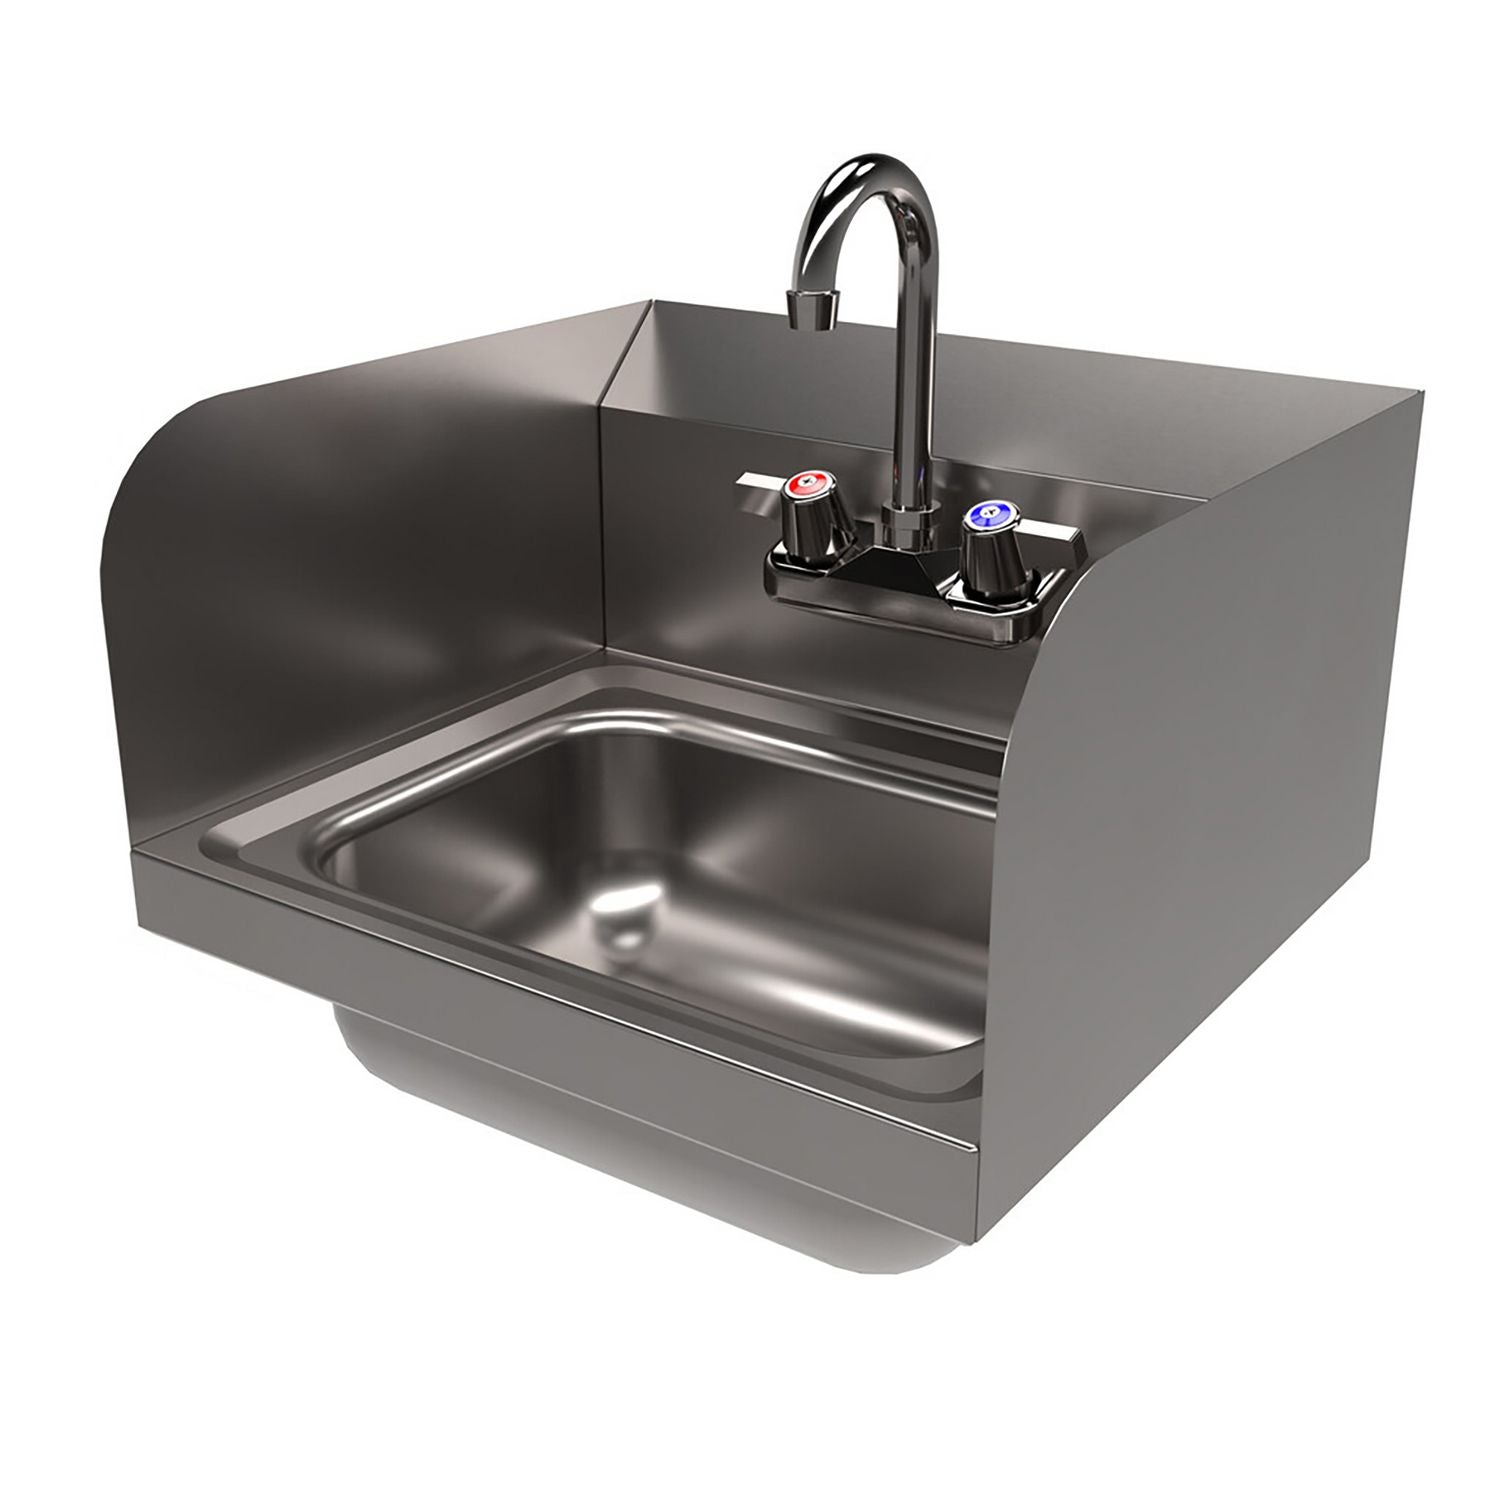 stainless-steel-hand-sink-with-side-splashes-and-faucet-14-l-x-10-w-x-5-h-ships-in-4-6-business-days_bkehsw1410ssp - 4